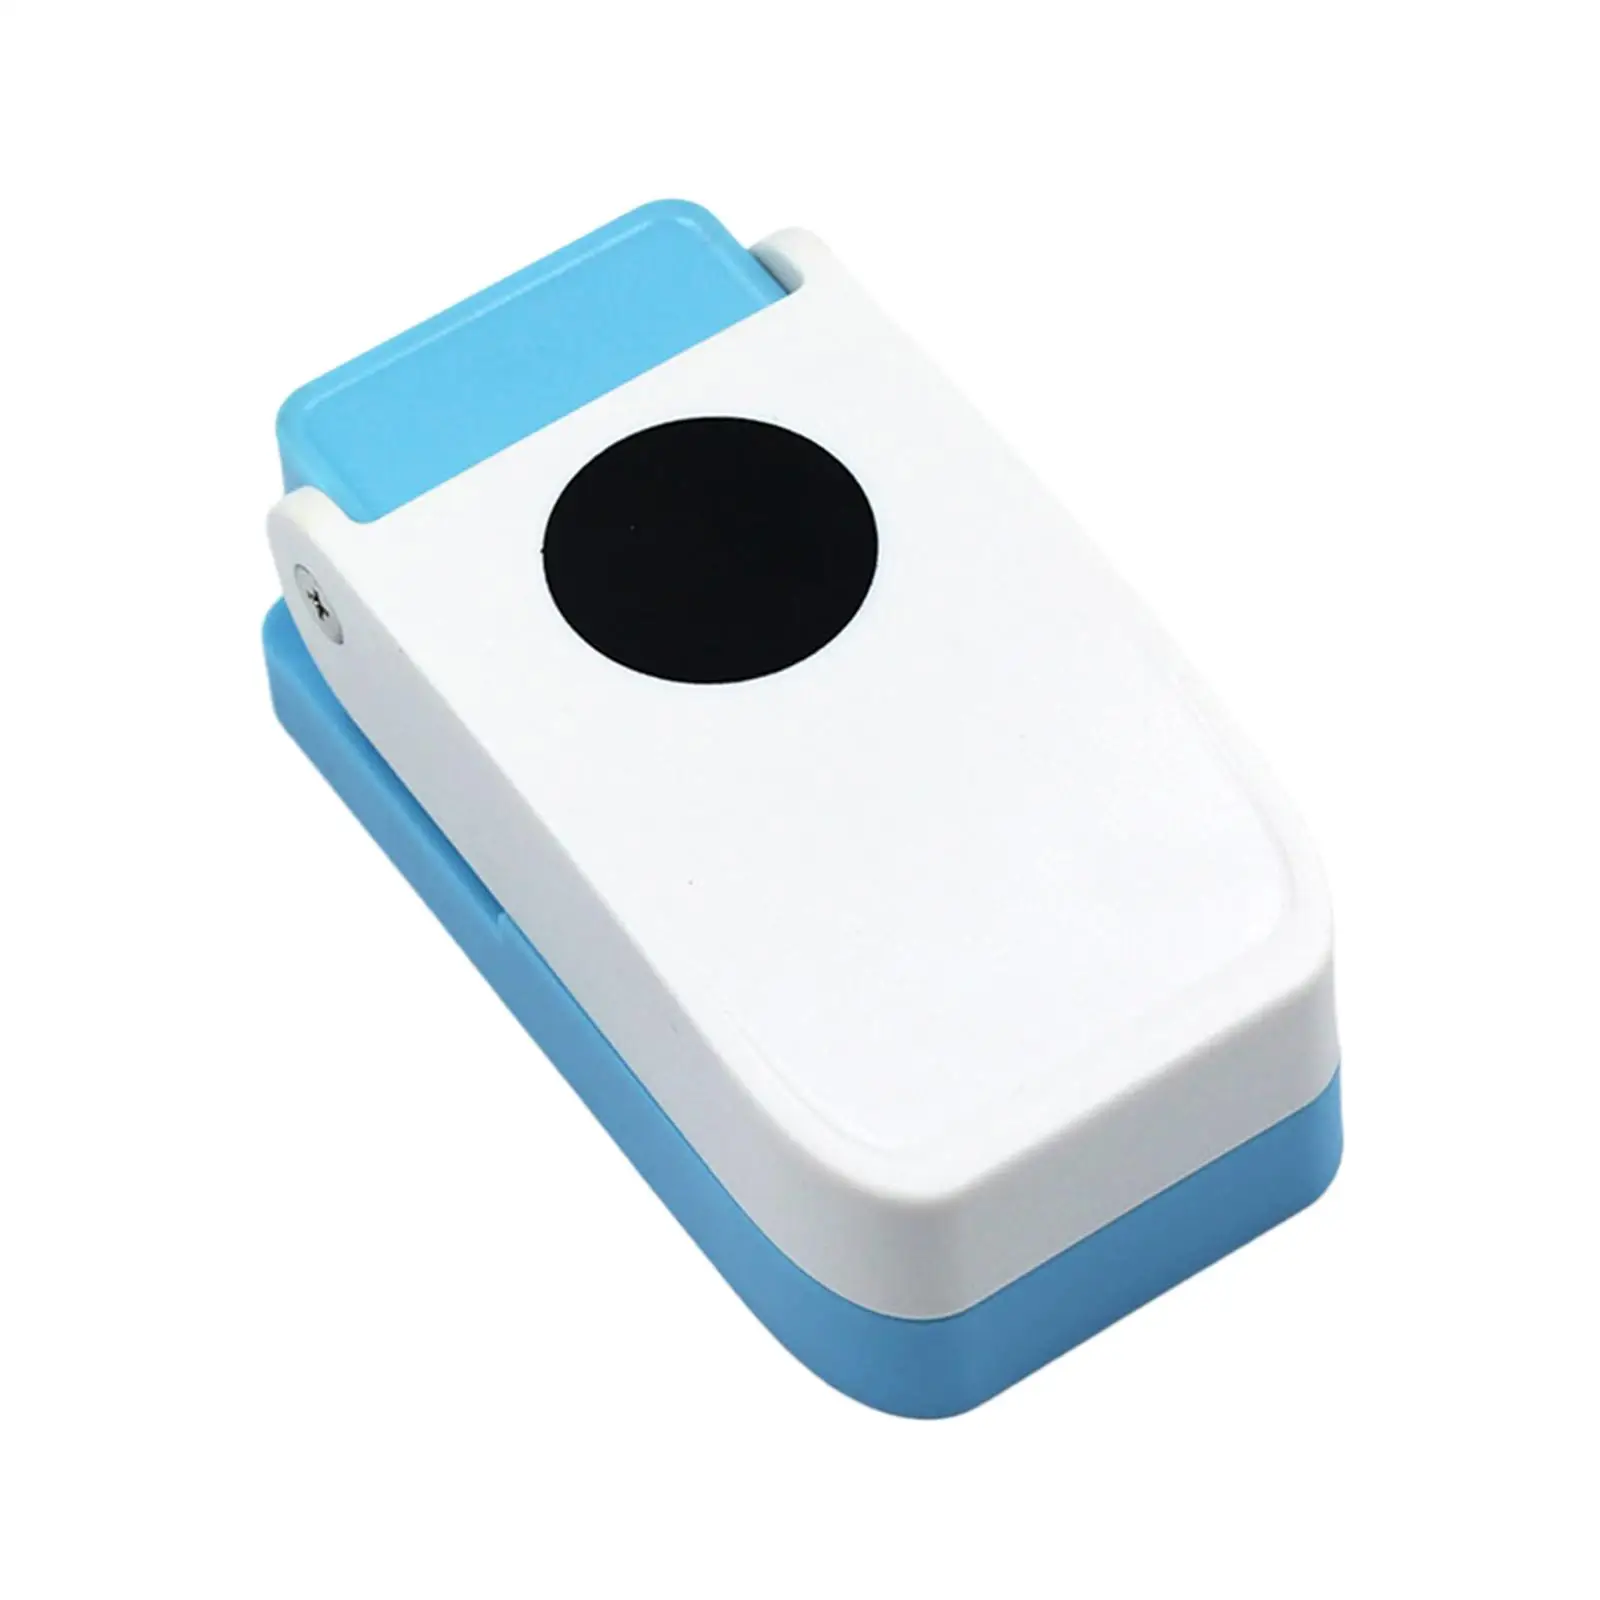 Paper Punch Hole Puncher for Kids Adults Hole Punch Shape for Festival Papers Crafting Supplies Scrapbook Gift Card Paper Craft